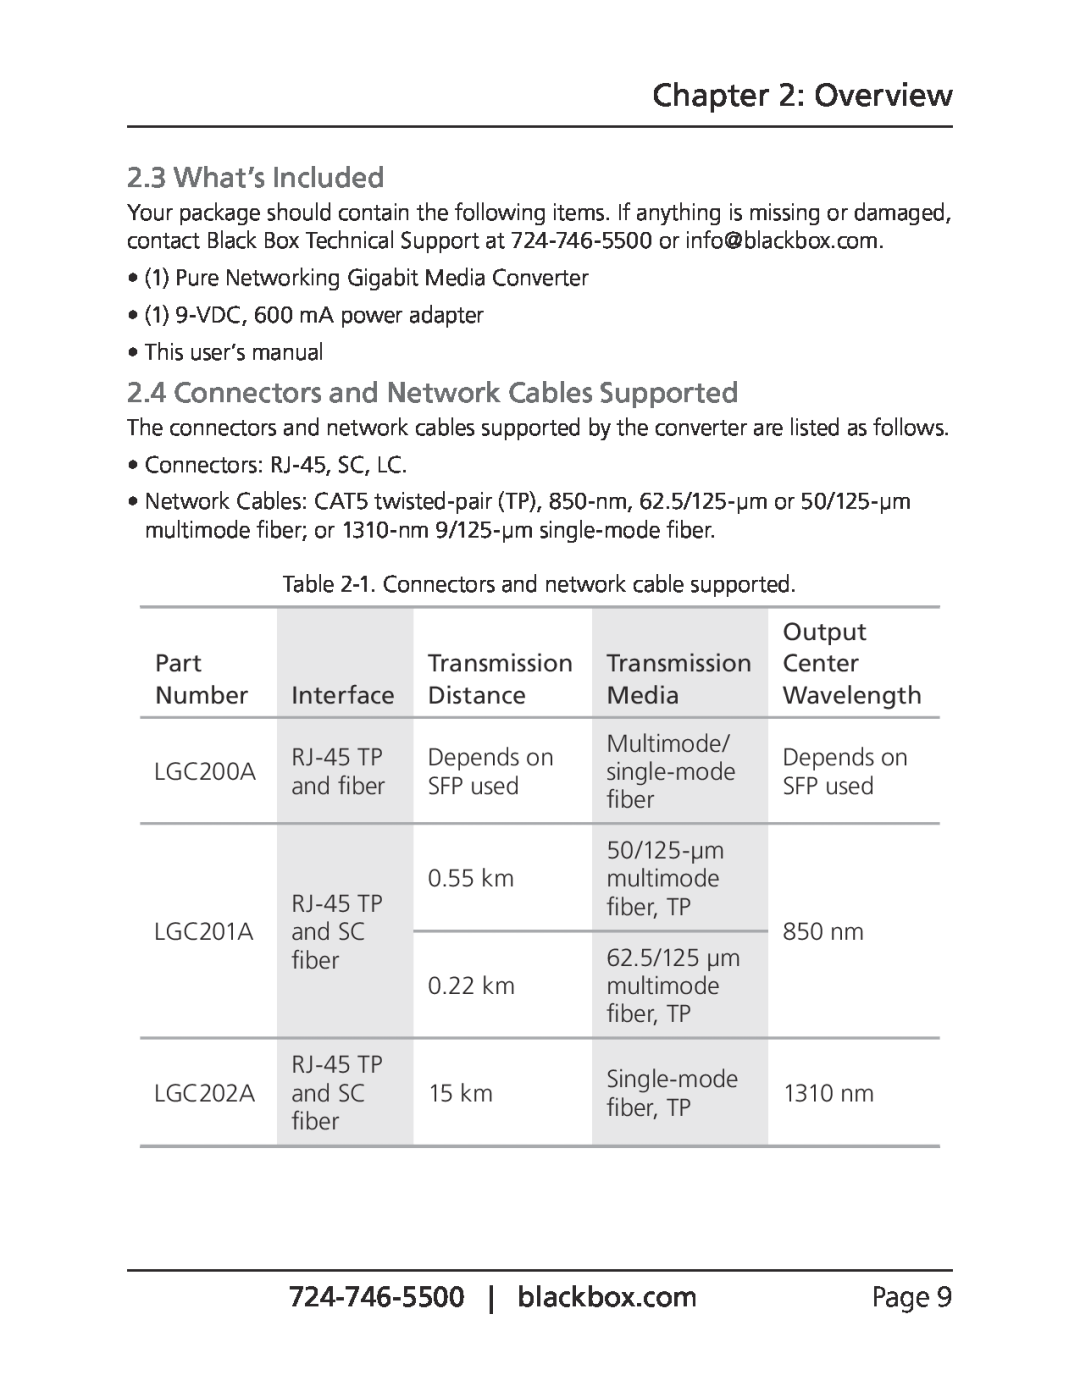 Black Box LGC201A, LGC202A, LGC200A manual What’s Included, Connectors and Network Cables Supported, Overview 